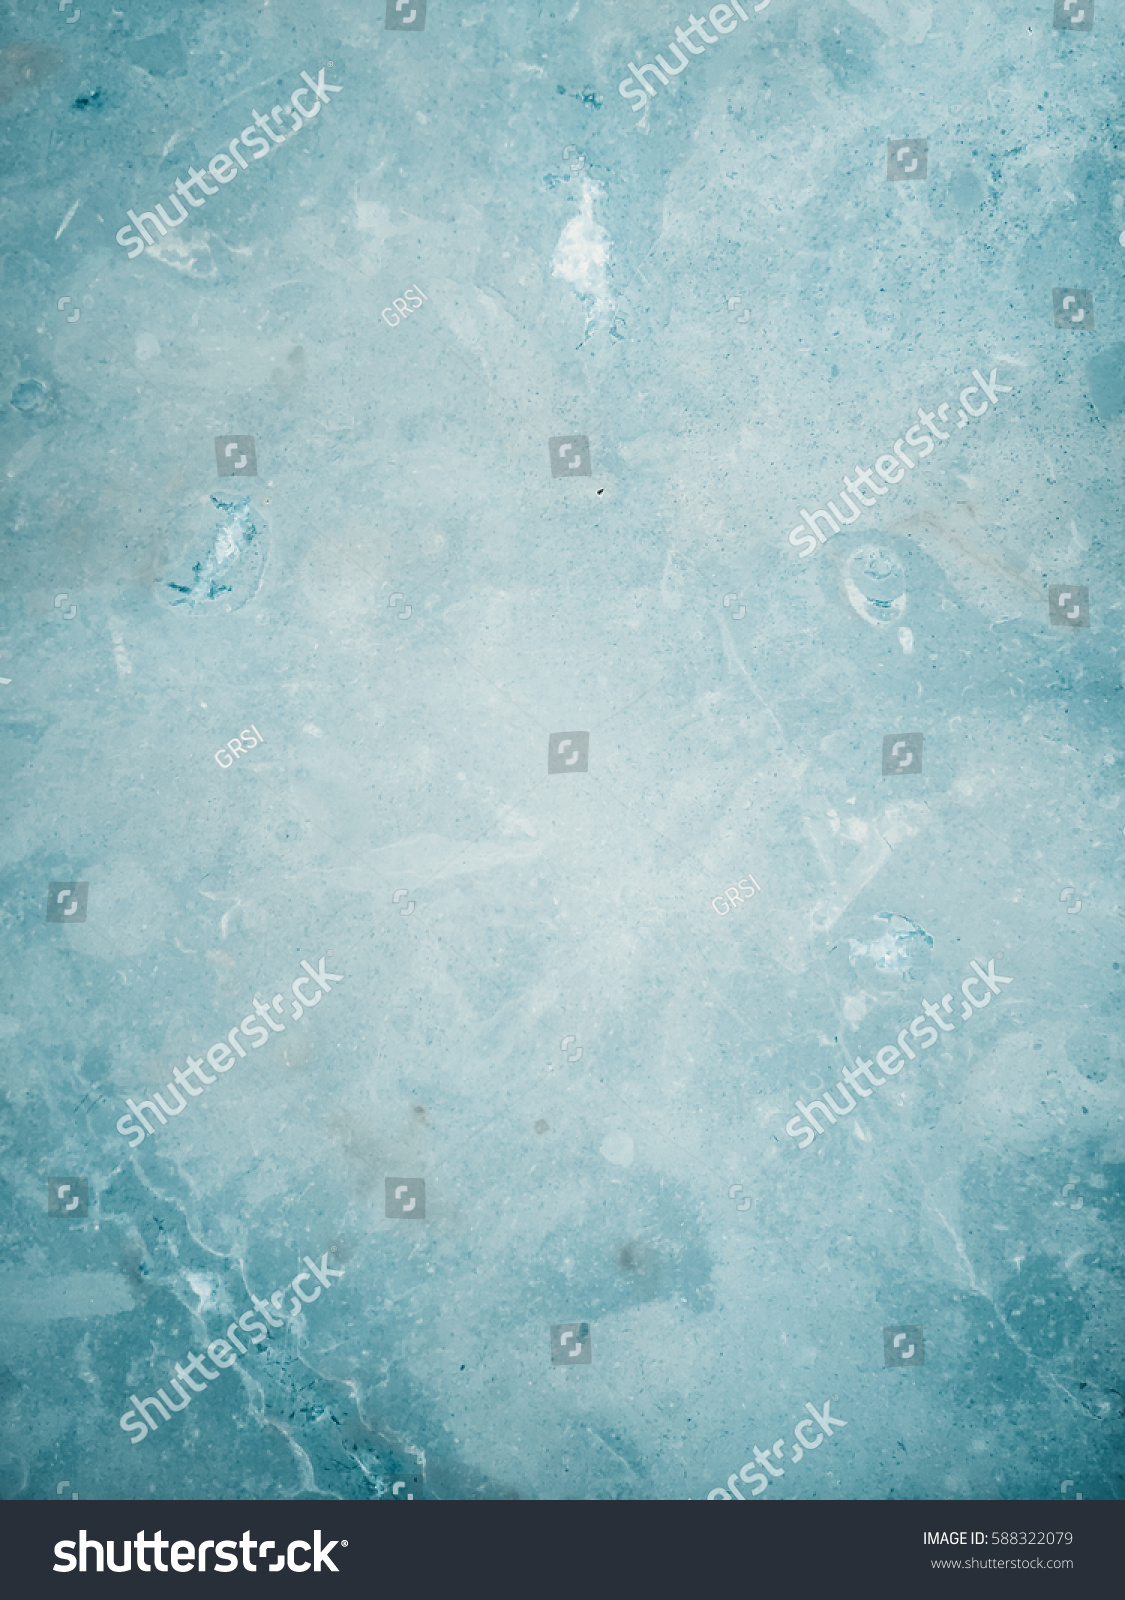 Macro close up detailed natural marble texture background picture #588322079